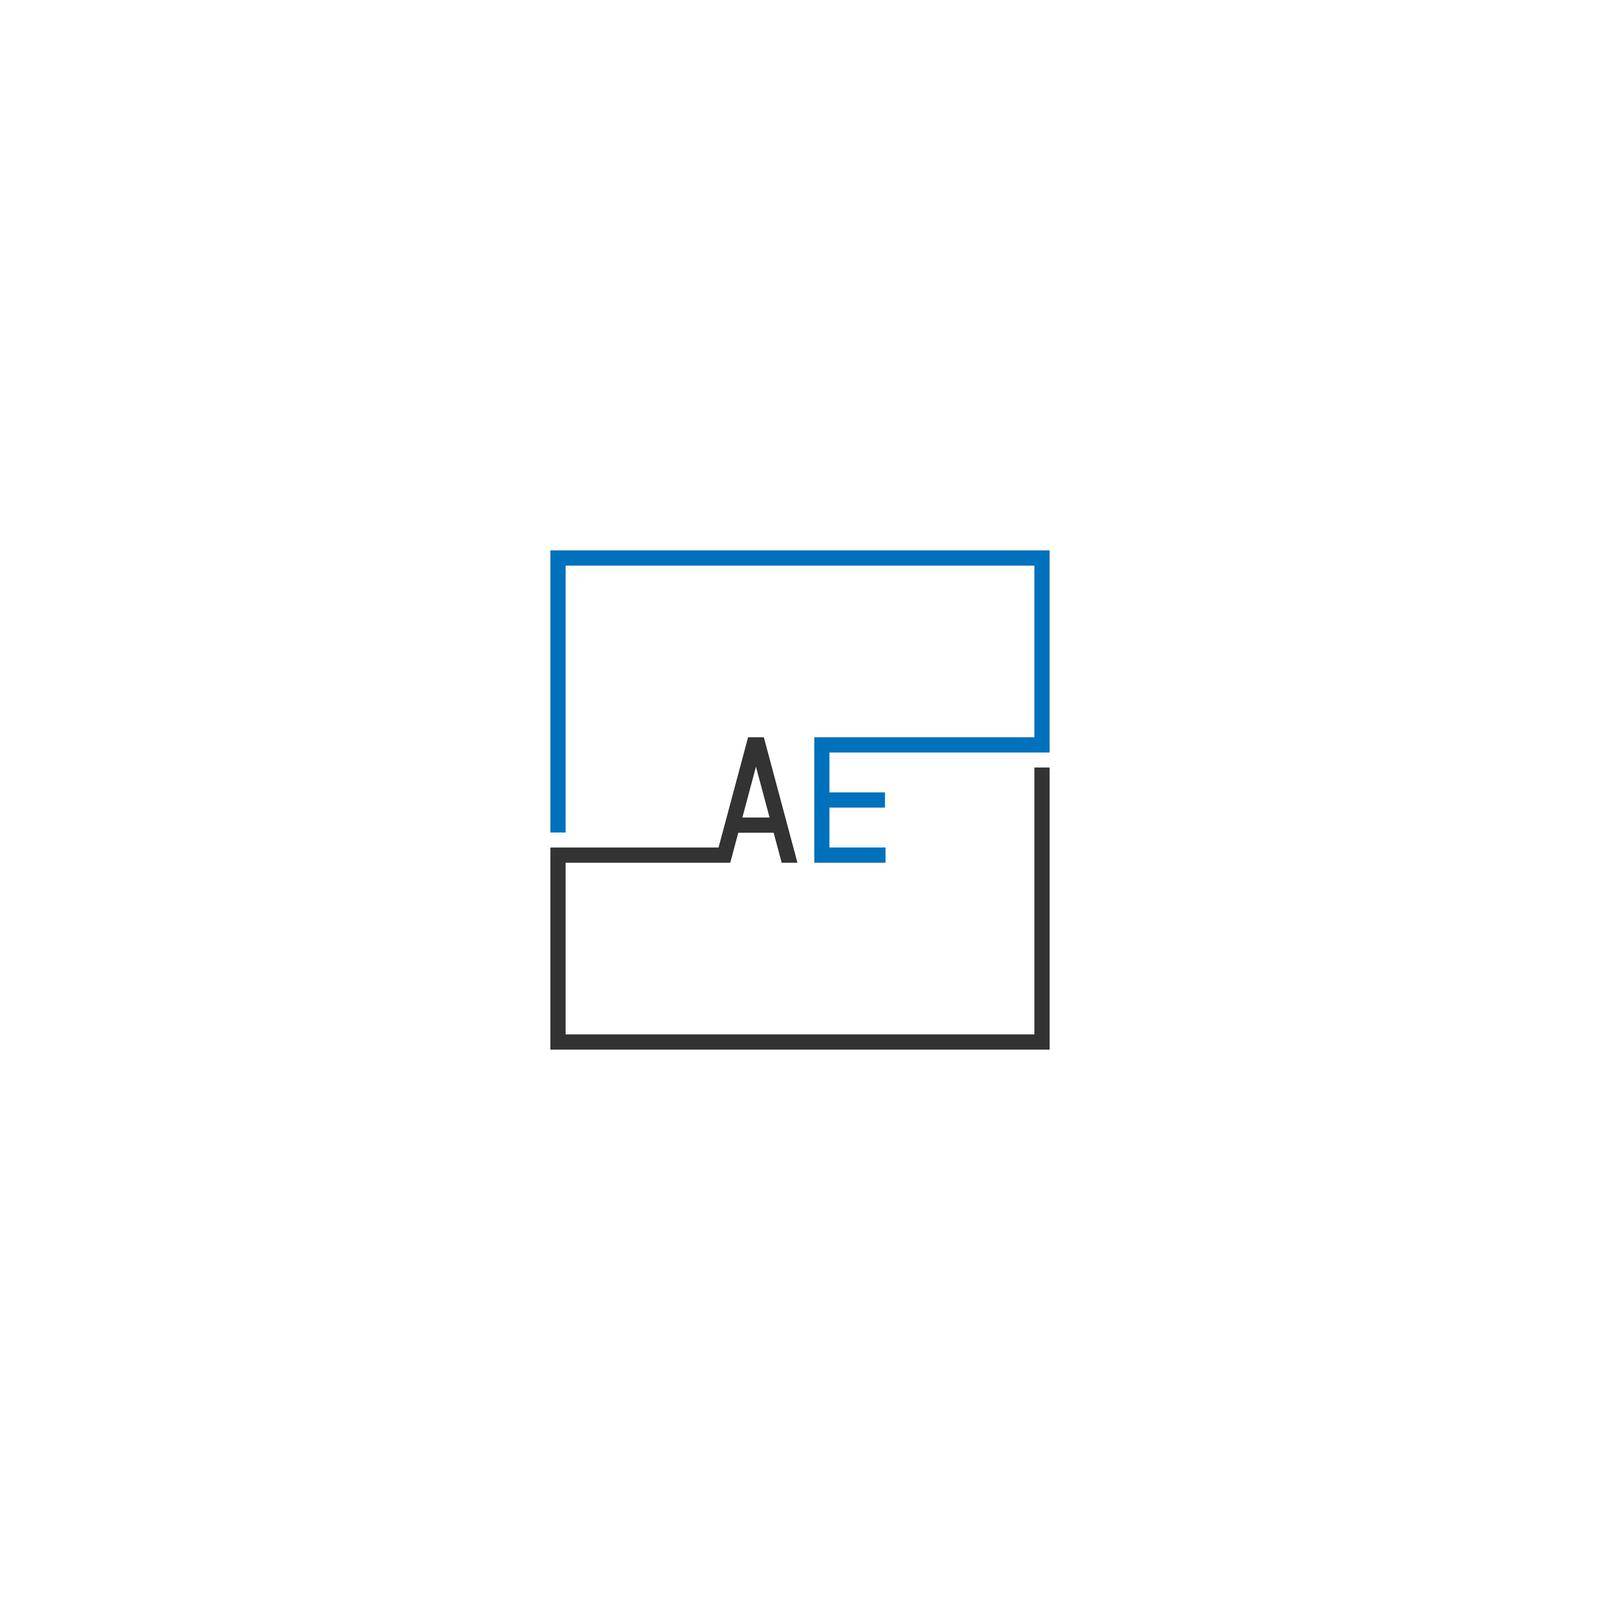 AE logo letter design concept by bellaxbudhong3